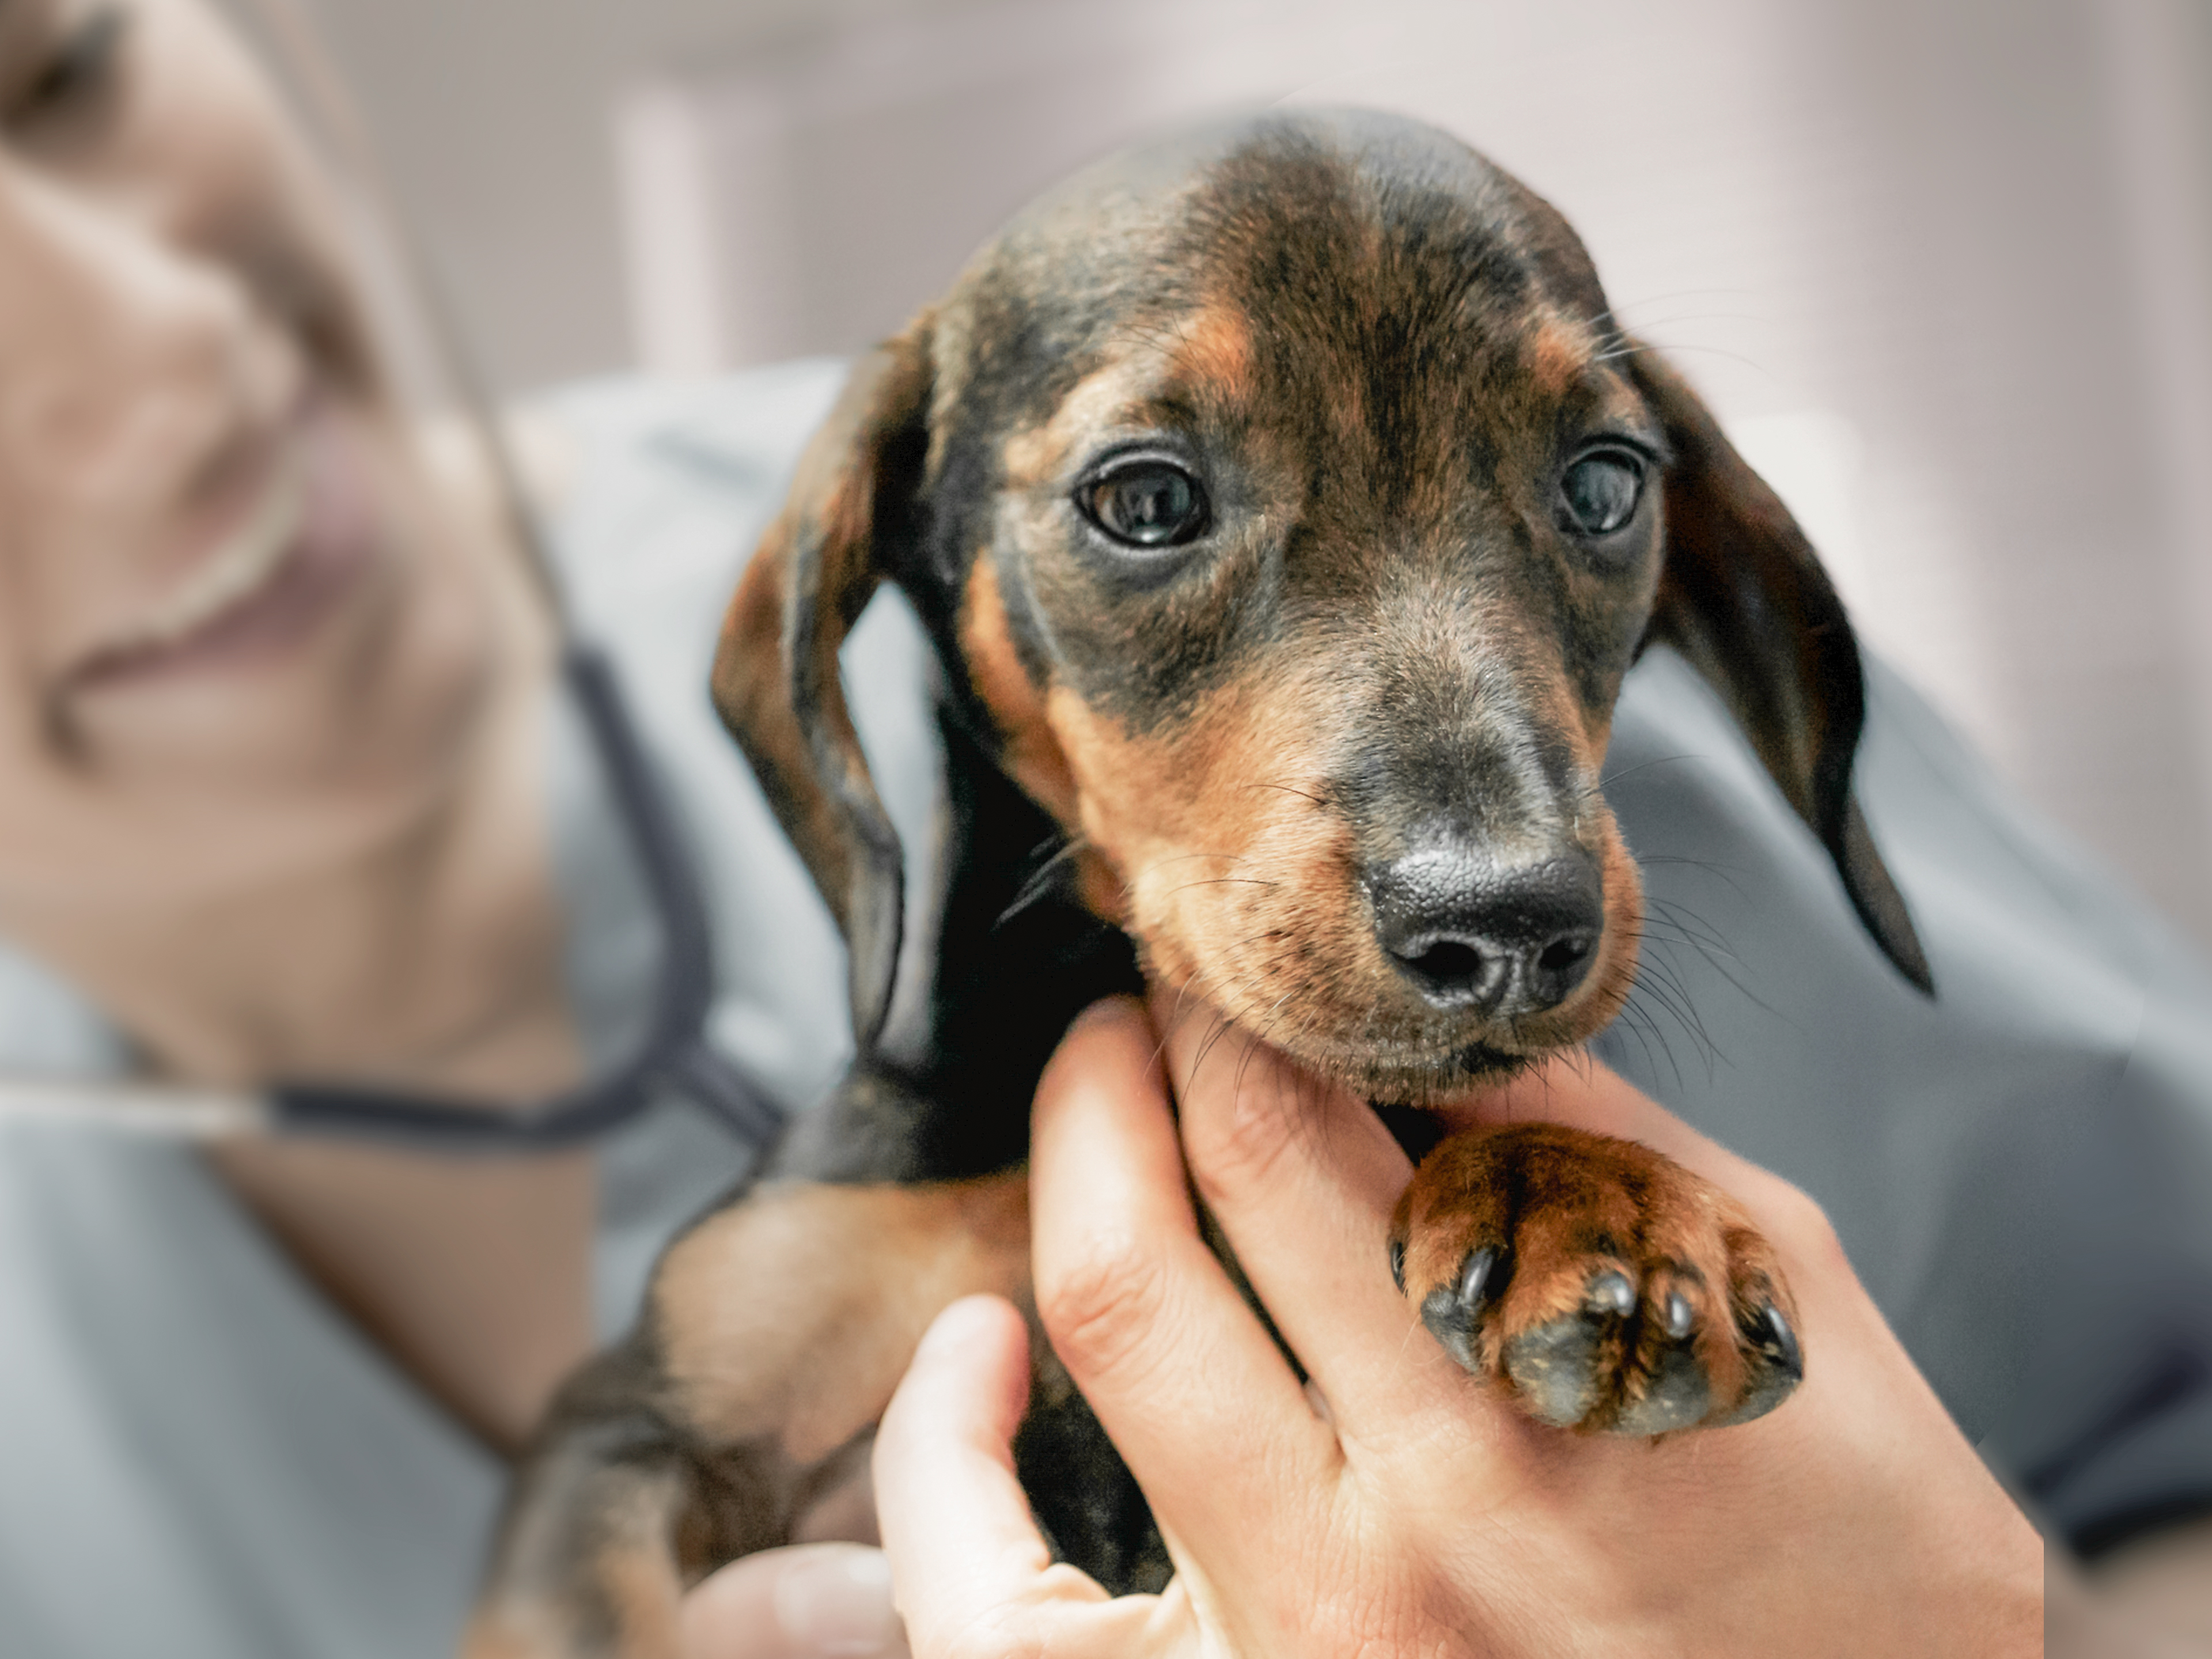 Dachshund puppy being examined by a vet